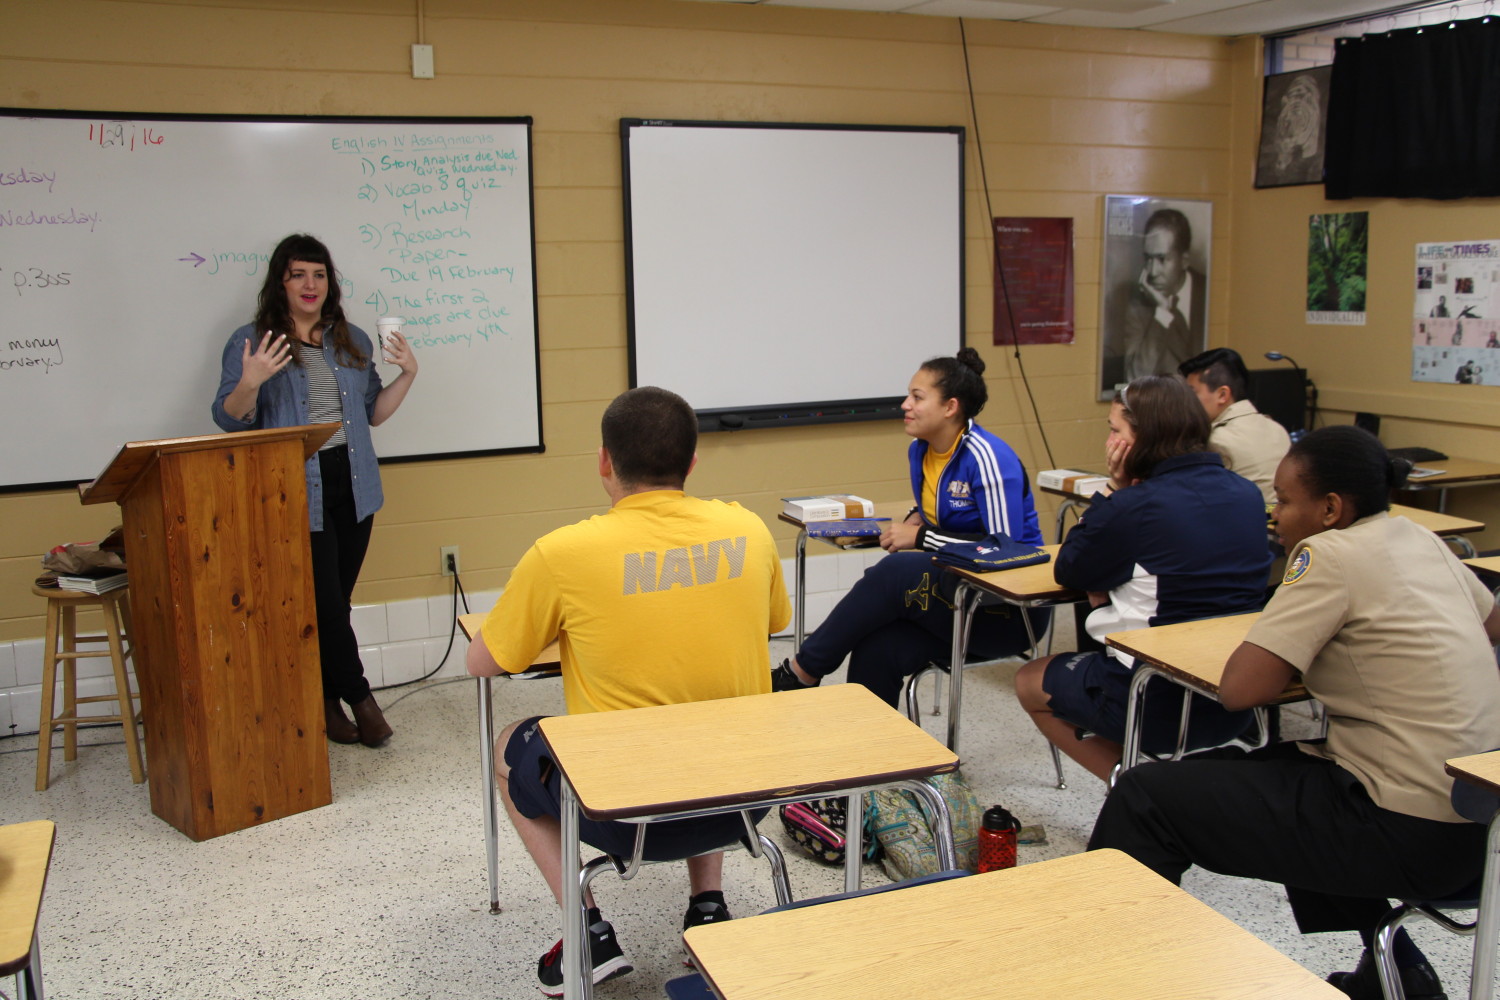  Nationally recognized poet, Megan Falley, has writing workshop for English students